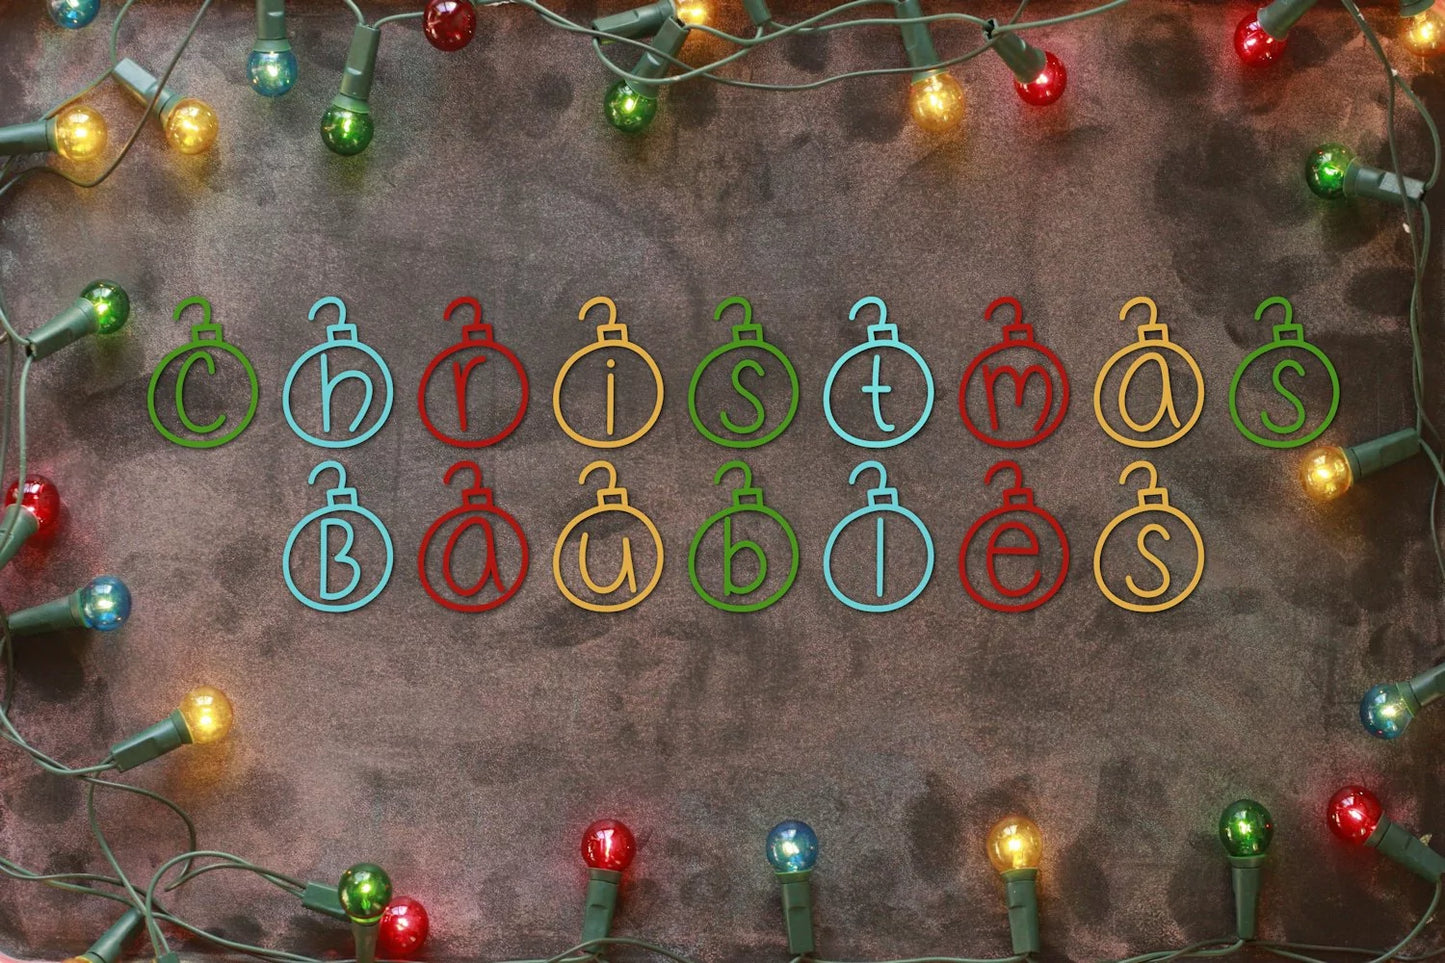 Christmas Baubles - A Handwritten Christmas Font With Doodles